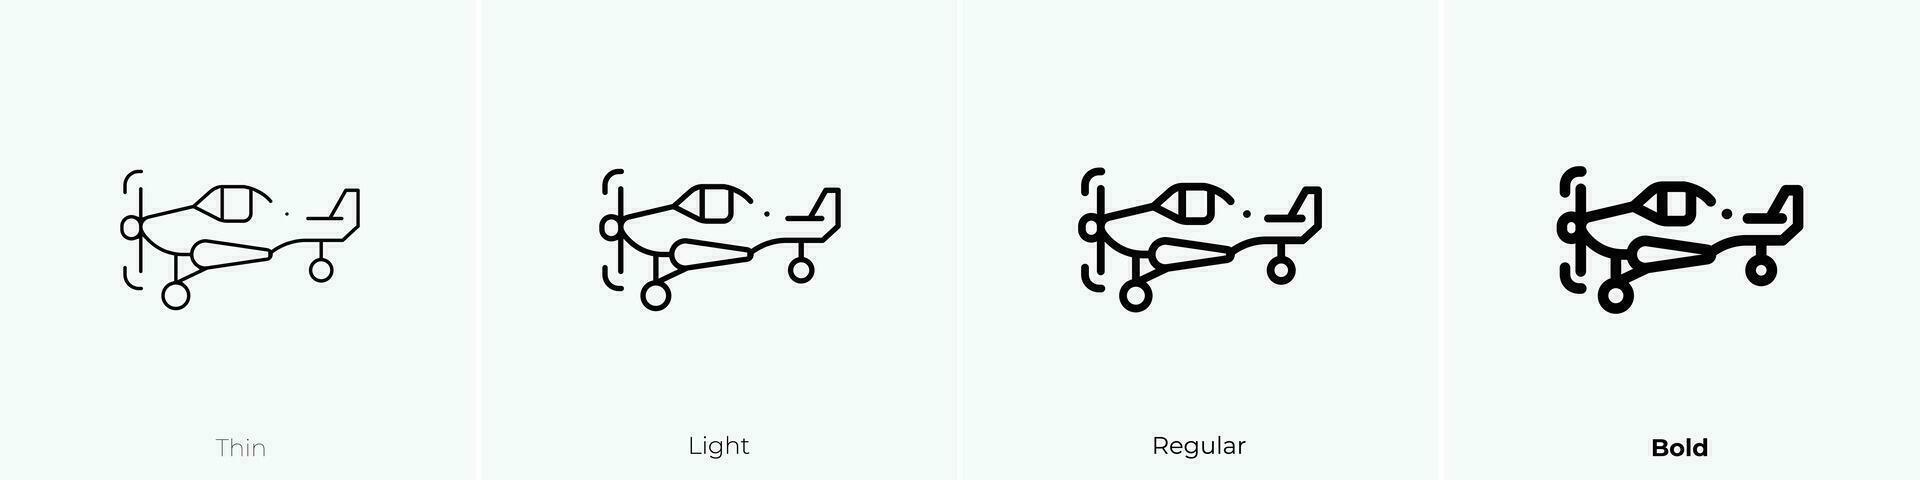 small plane icon. Thin, Light, Regular And Bold style design isolated on white background vector